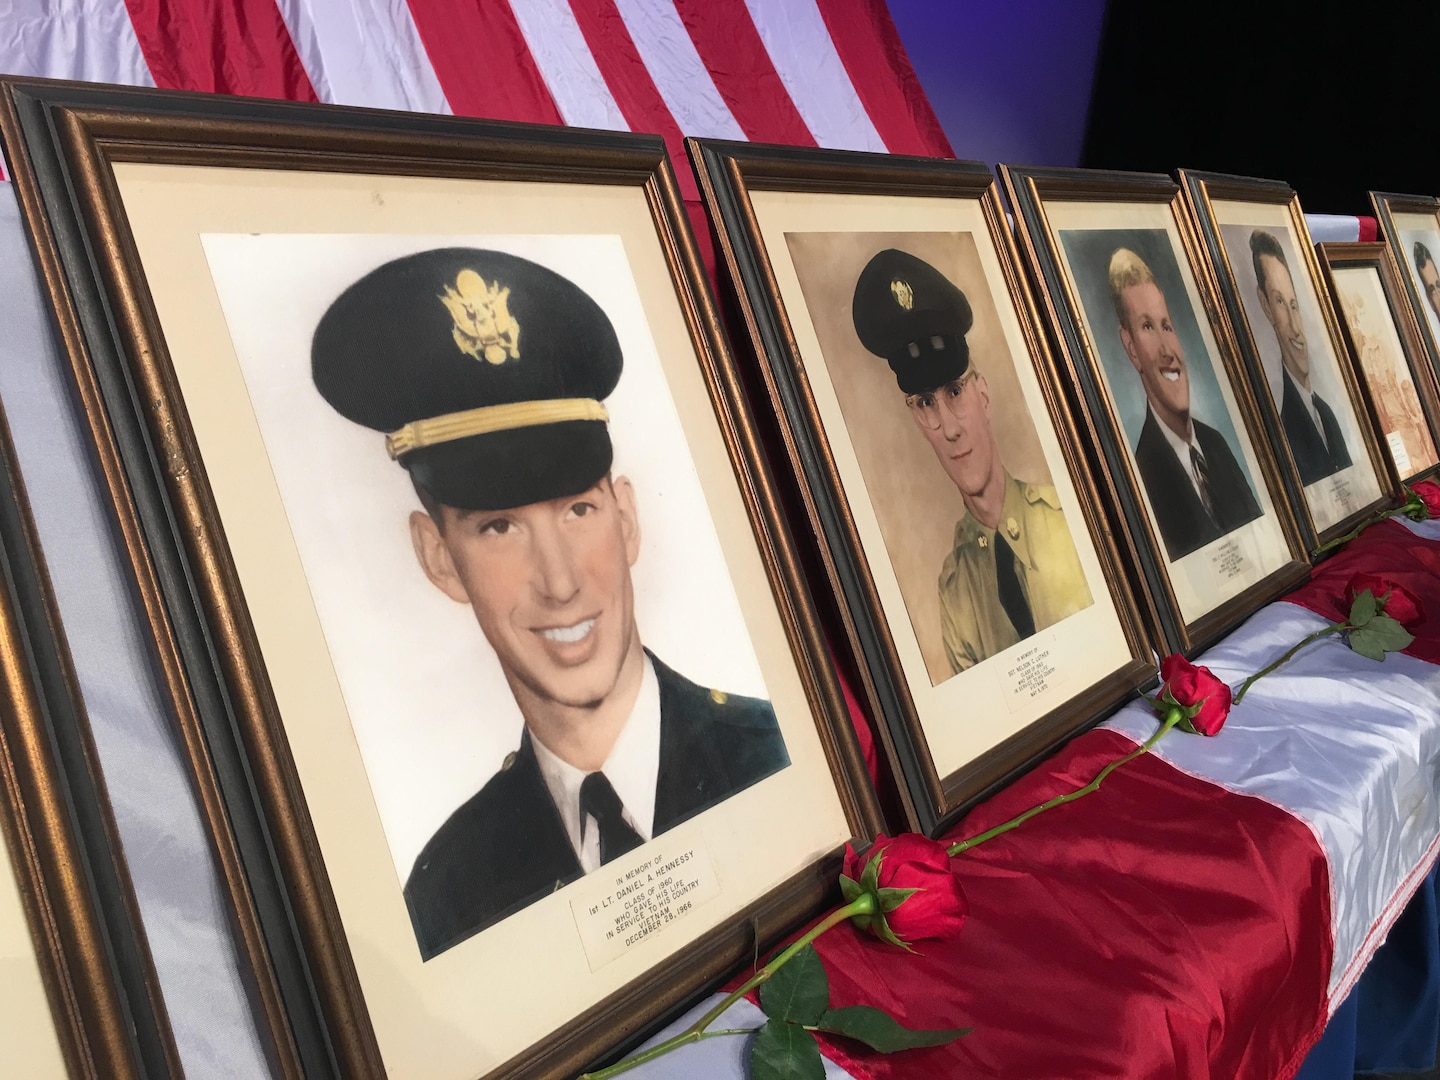 Portraits of the Council Rock 15 are displayed on stage during a Memorial Day ceremony May 26 at Council Rock North High School in Newtown, Pennsylvania. The portraits are of graduates of the school who lost their lives in U.S. armed conflicts, including Army Lt. Daniel A. Hennessey (foreground), Class of 1960, who was killed in Vietnam in 1966.